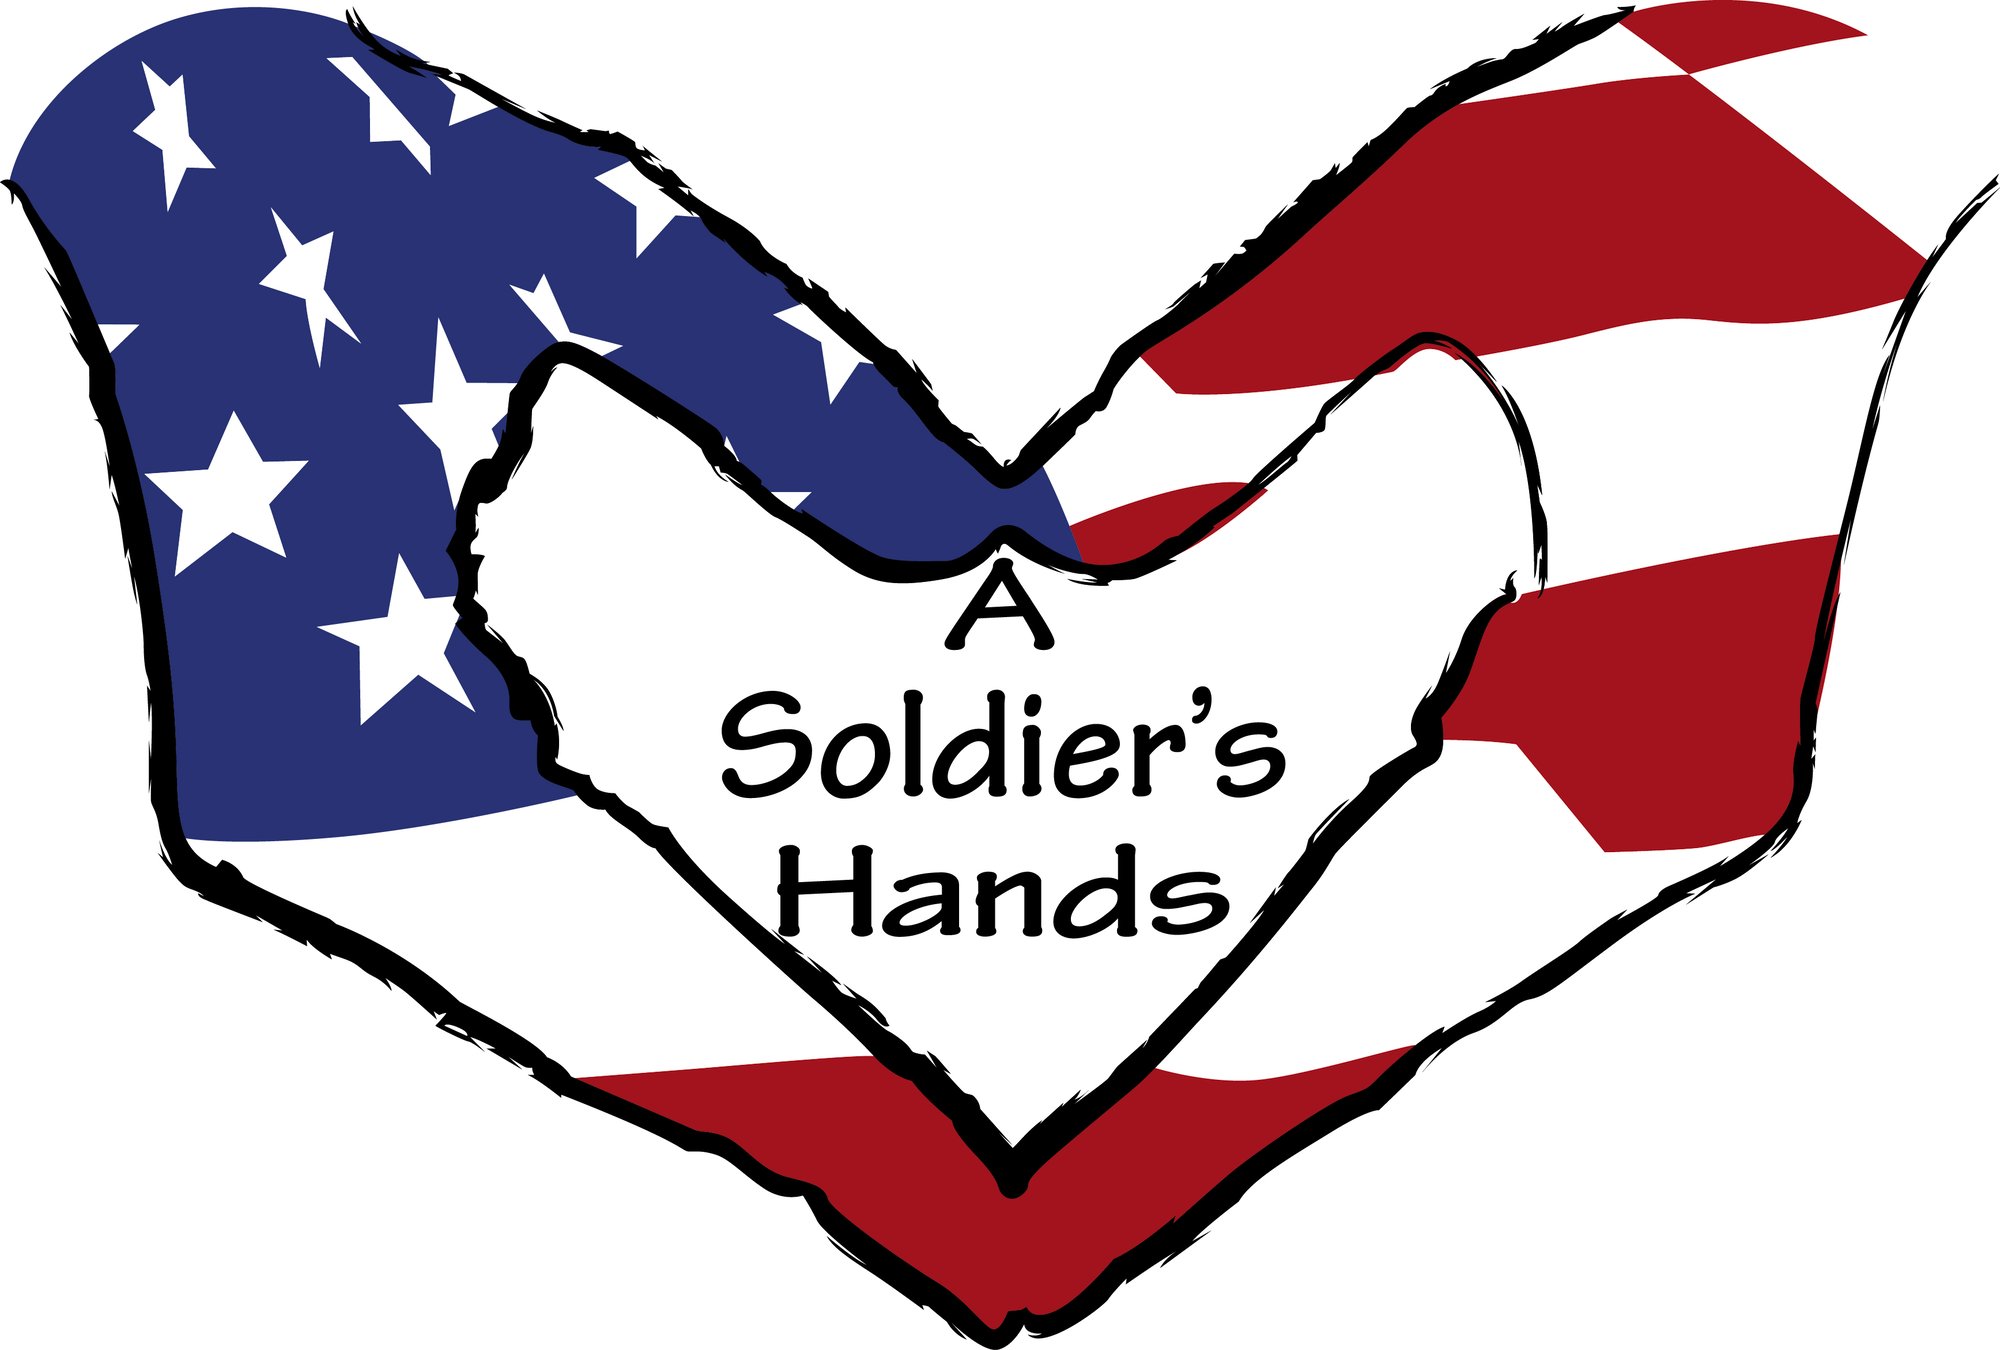 A Soldiers Hands